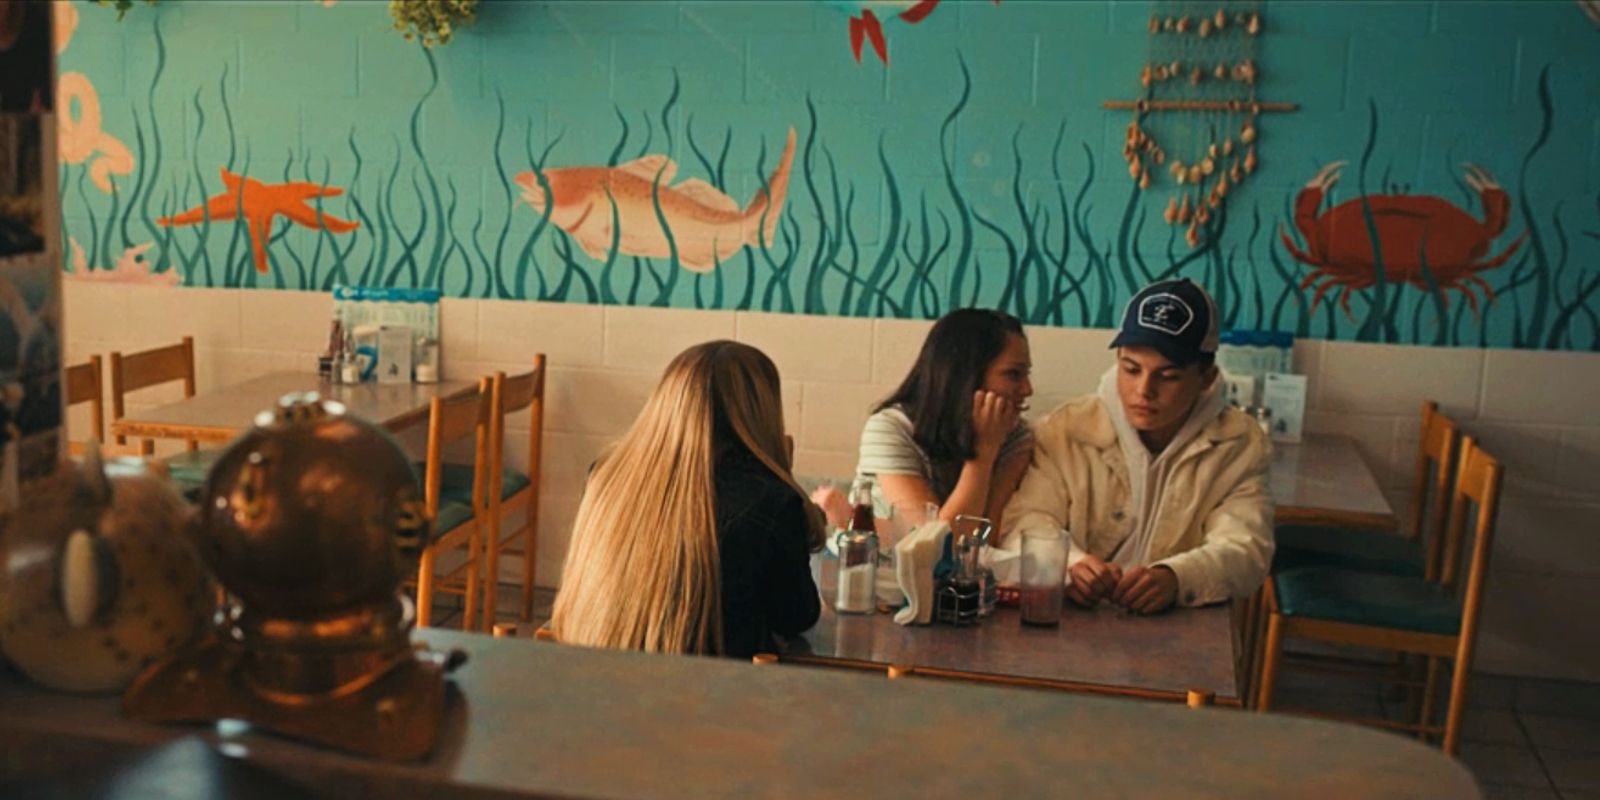 Warren, Josephine, and Kelly sit at a table in a diner in Under the Bridge